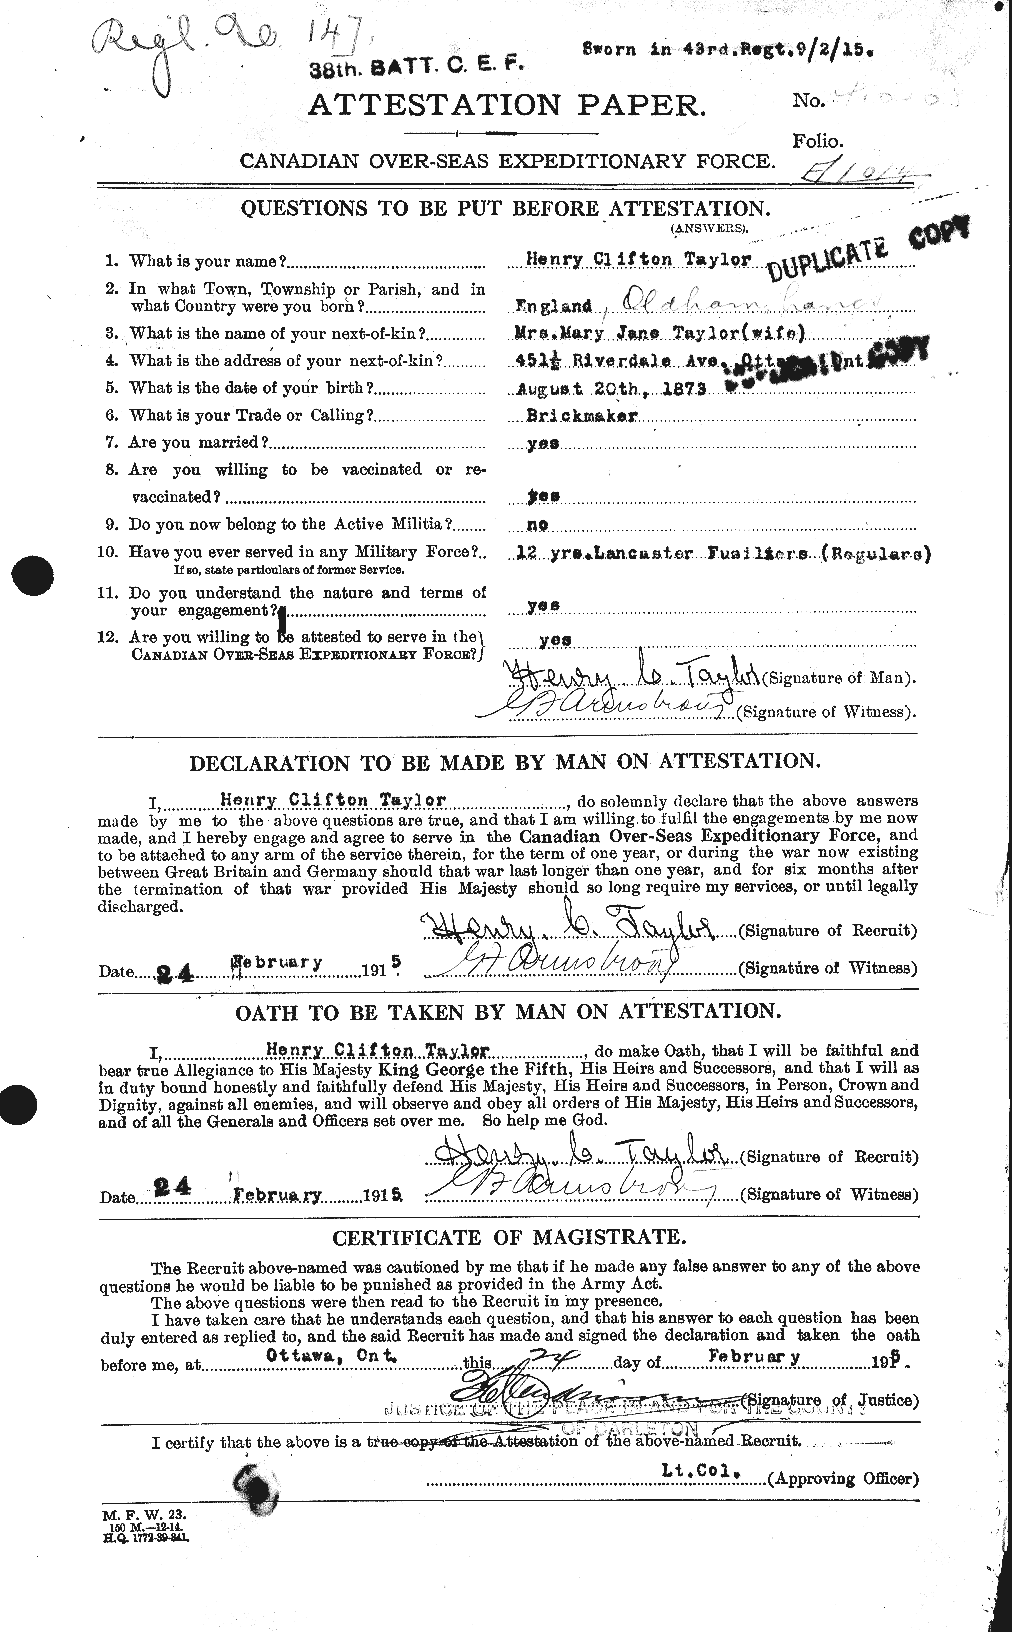 Personnel Records of the First World War - CEF 626532a